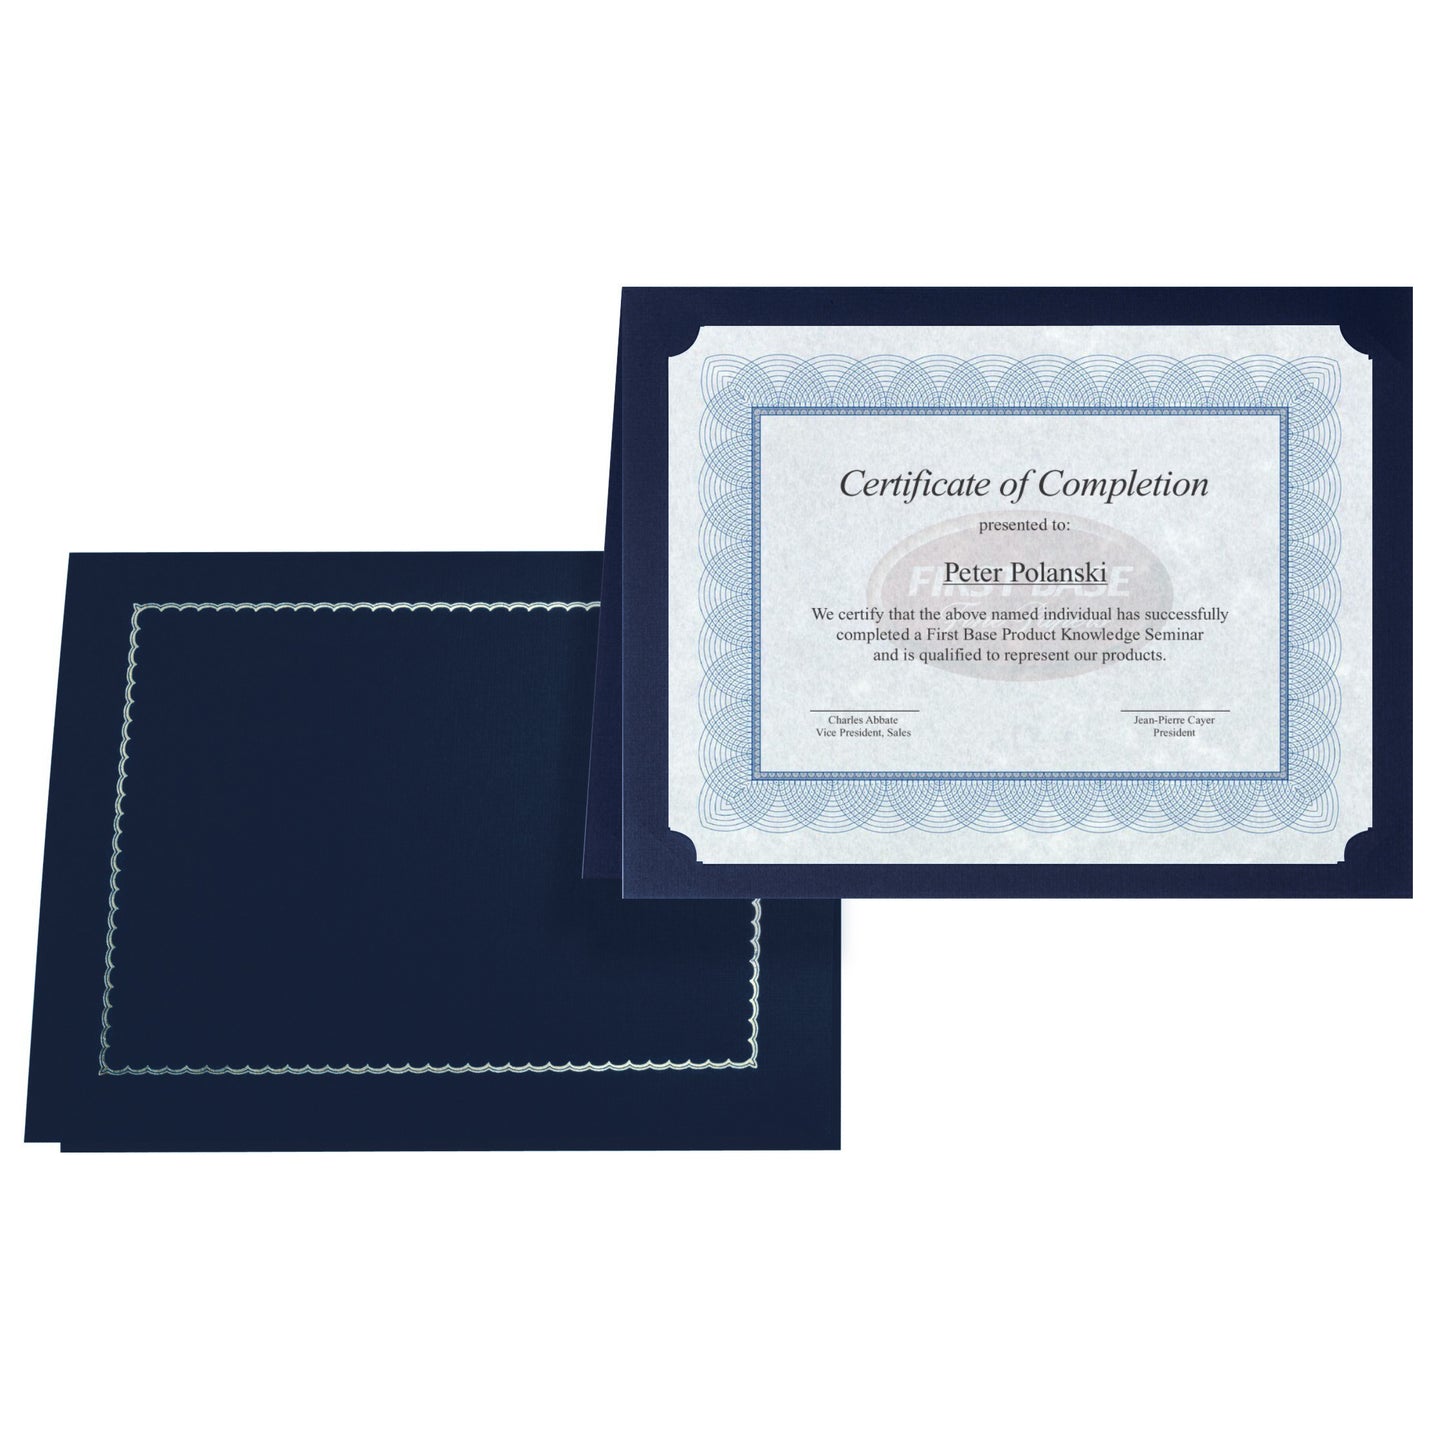 St. James® Classic Linen Certificate Holders with Gold Foil, Navy Blue, Pack of 5